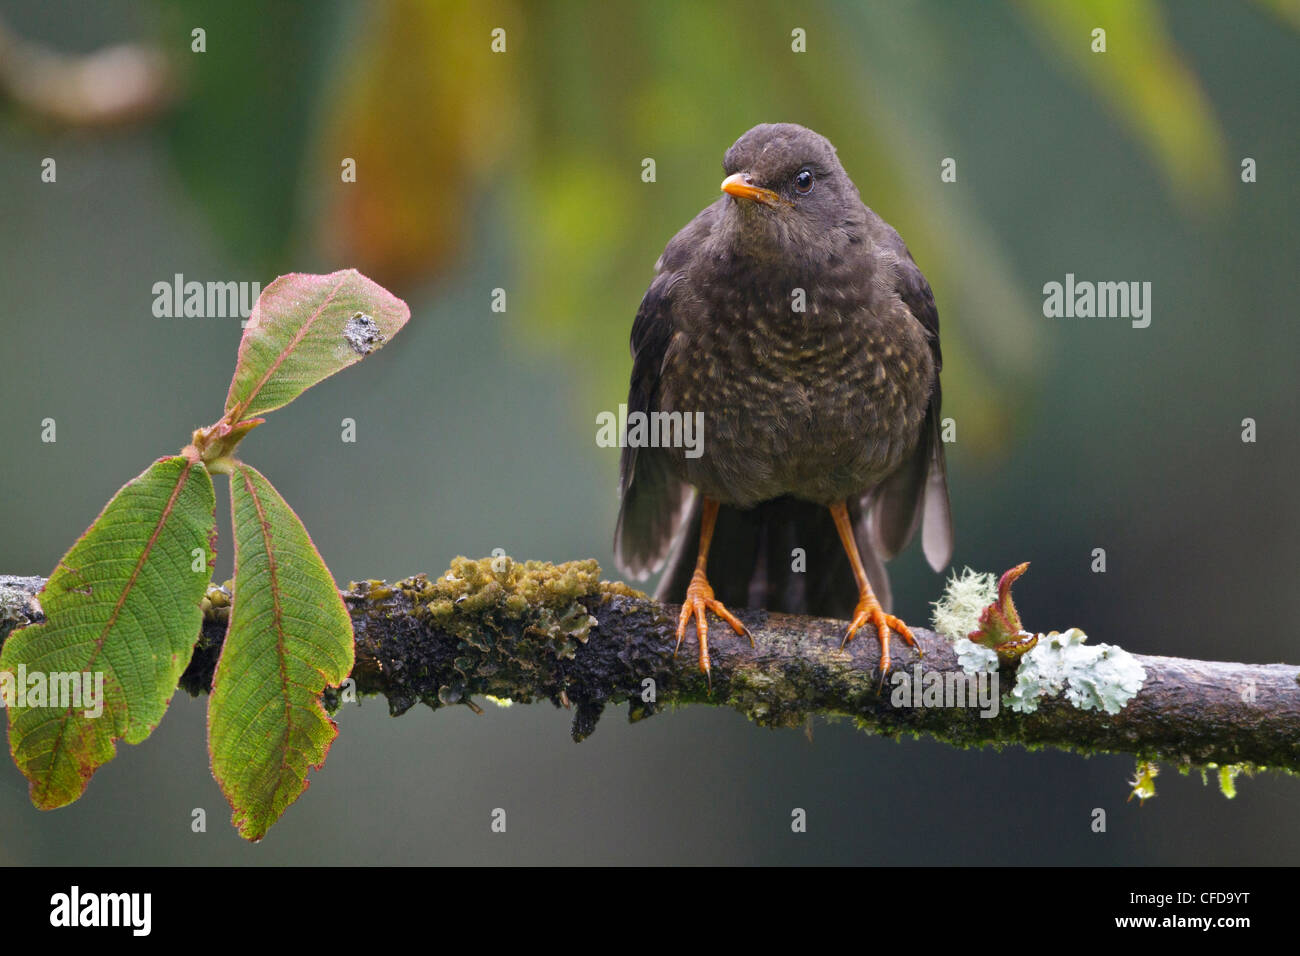 Great Thrush (Turdus fuscater) perched on a branch in Ecuador. Stock Photo